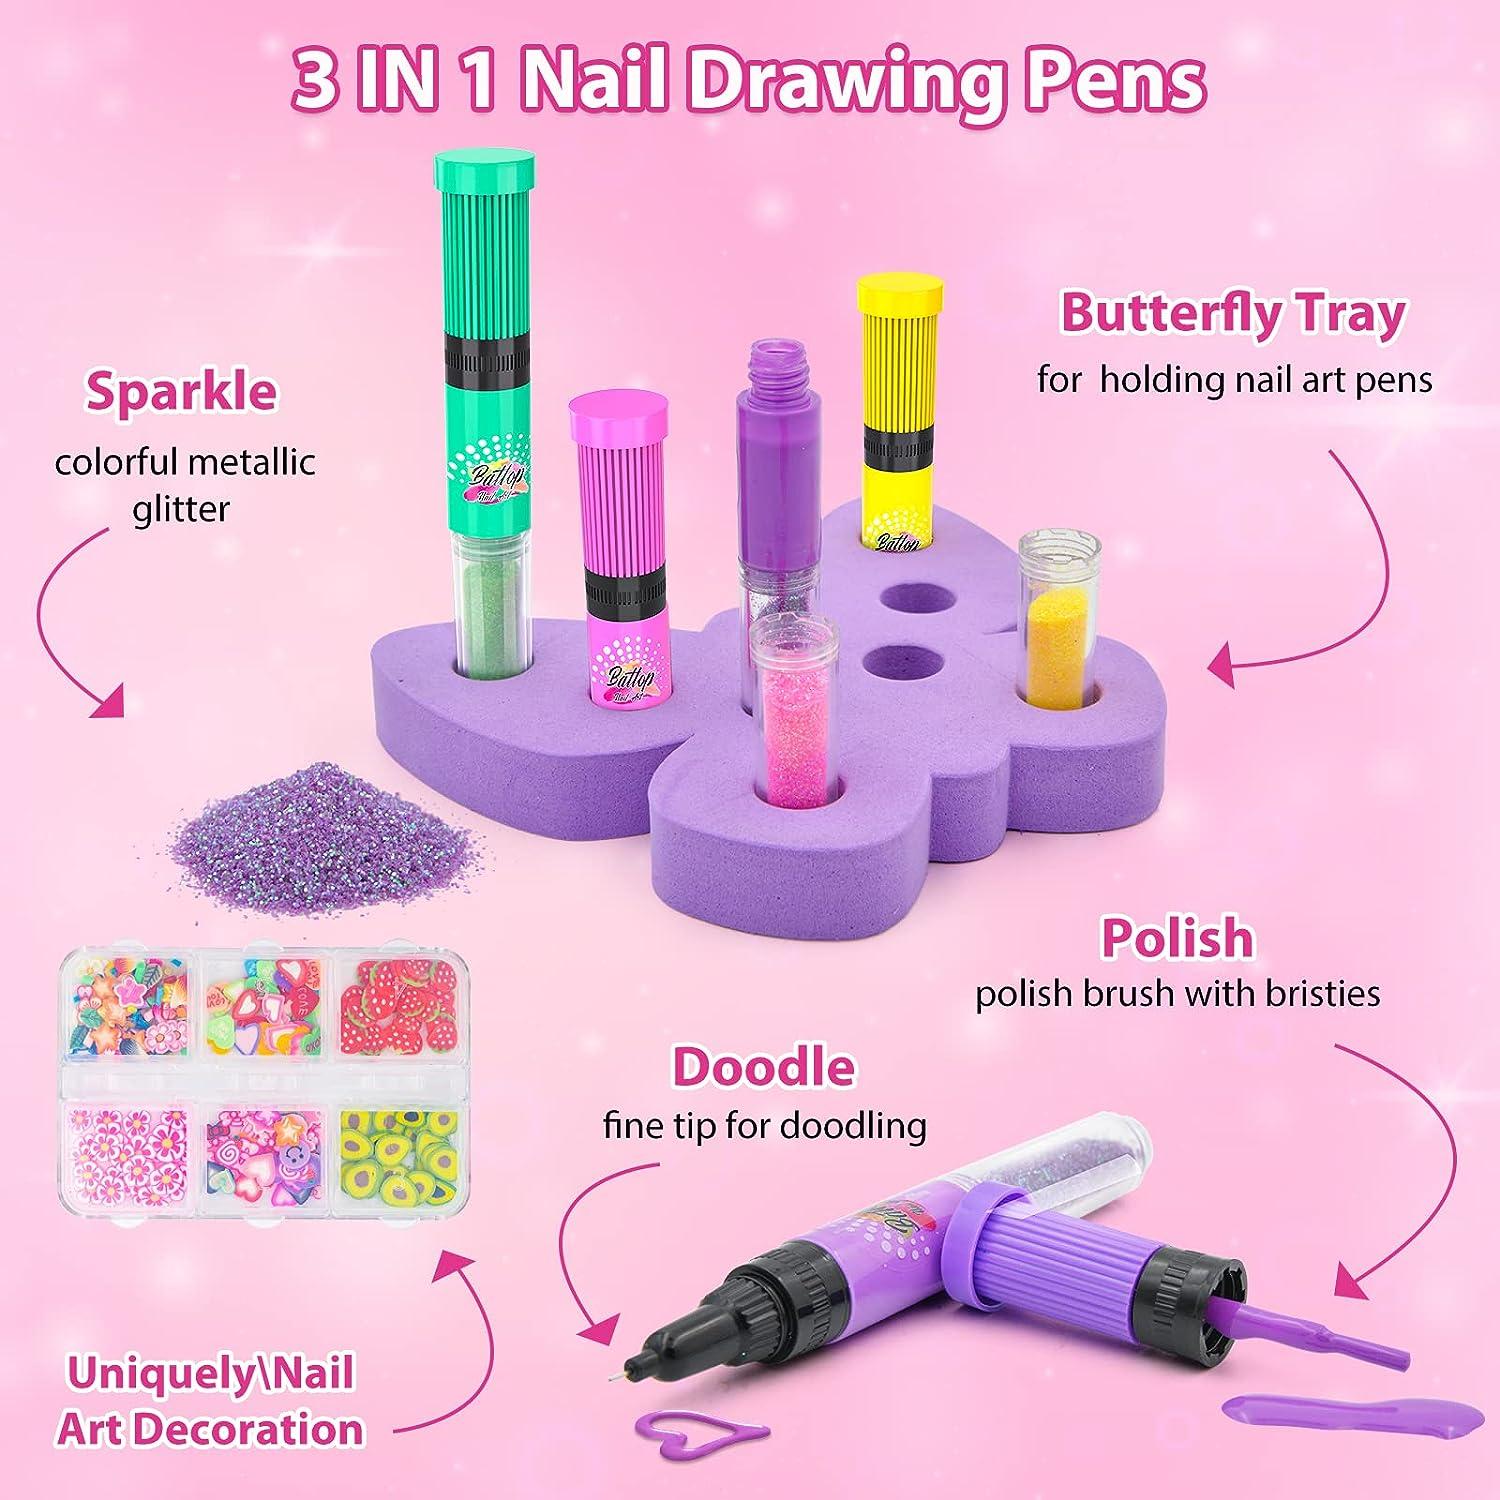 BATTOP Kids Nail Polish Kit for Girls Ages 7-12 Years Old - Nail Art Studio  Set - Cool Girly Gifts with Nail Polish, Pen, Dryer, Sticker, Charm